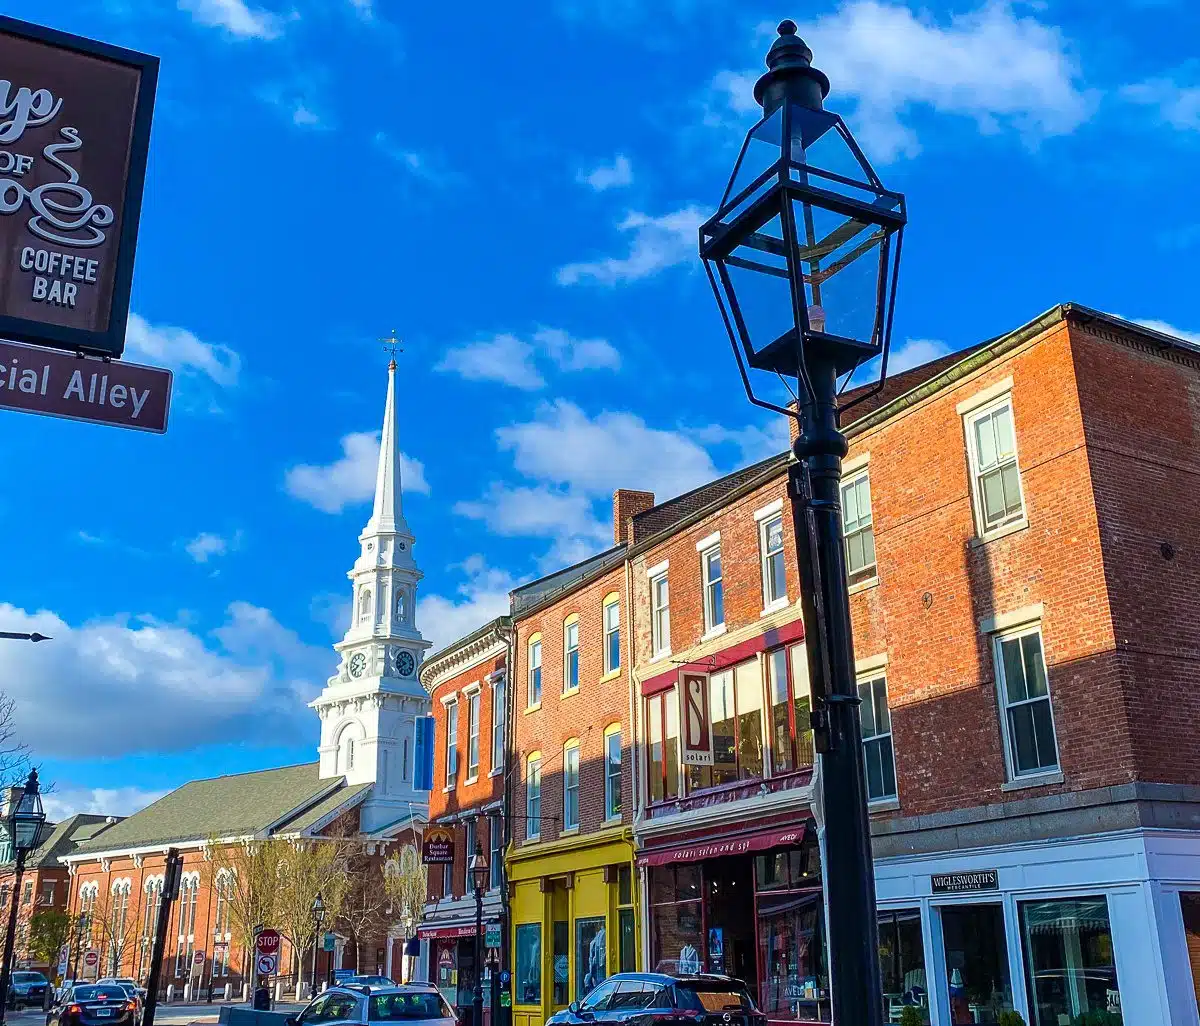 Portsmouth, NH is full of cute shops and restaurants.